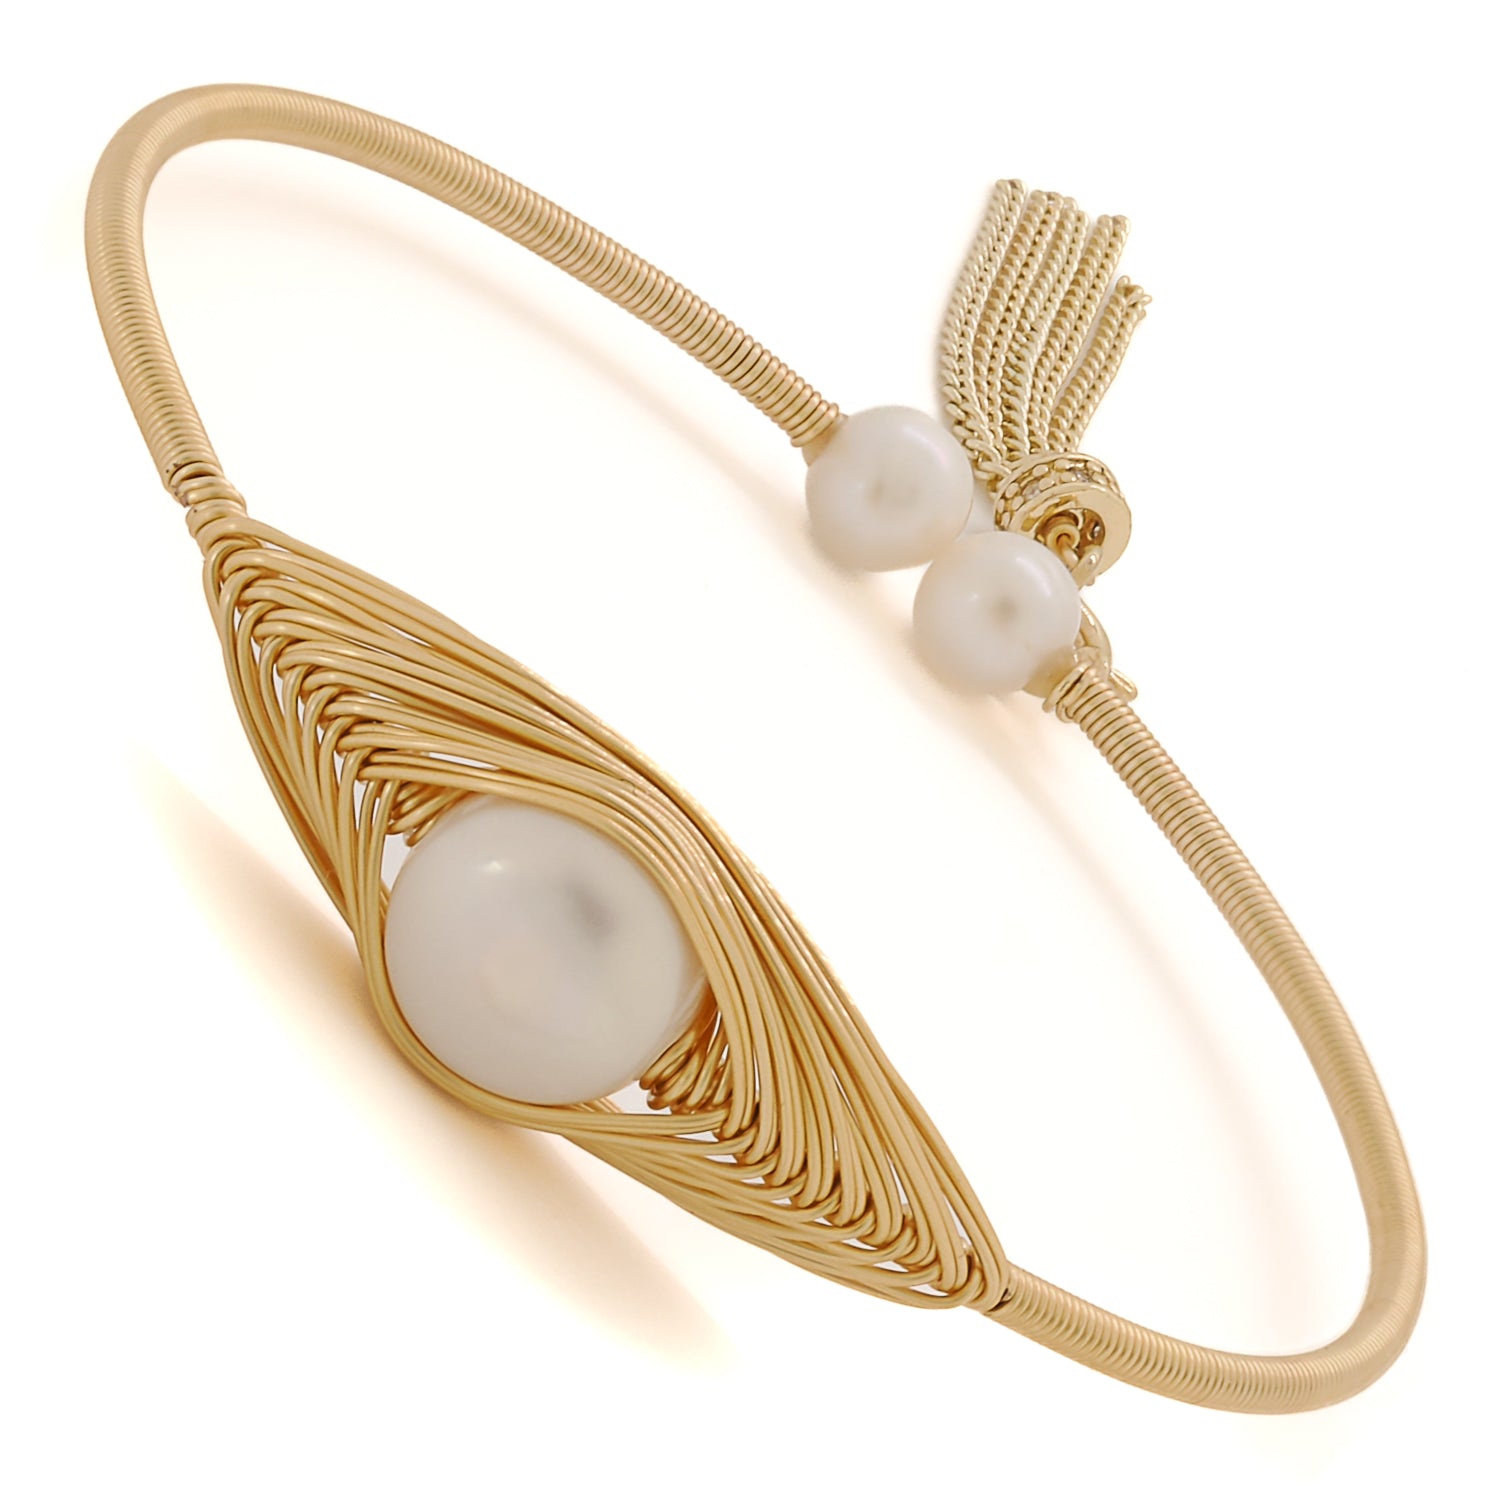 Elevate your elegance with the opulent Cleopatra Gold and Pearl Bangle Bracelet.